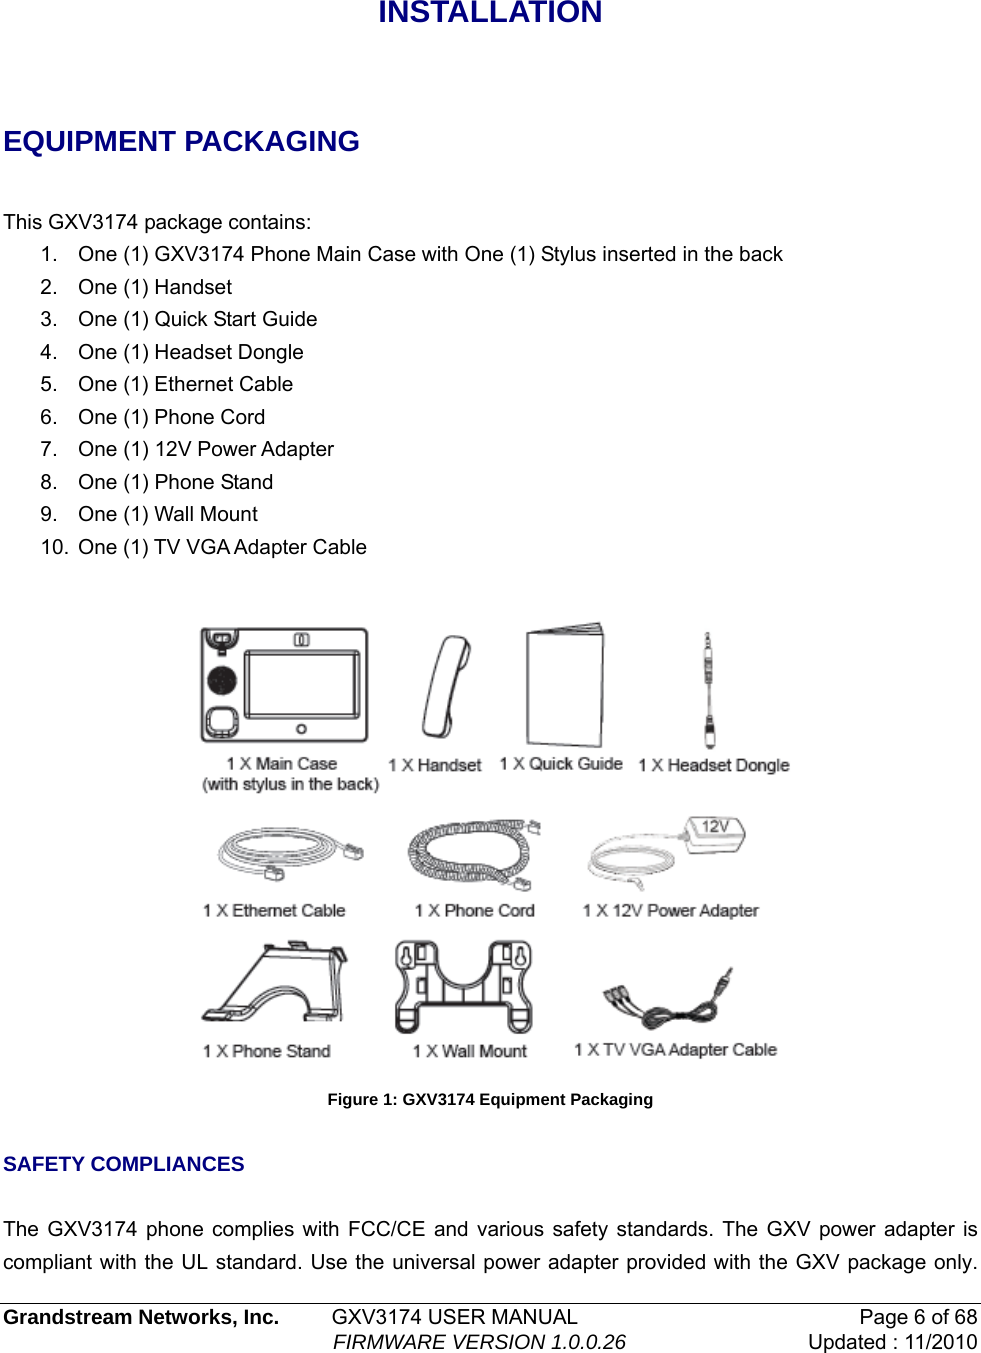 INSTALLATION  EQUIPMENT PACKAGING  This GXV3174 package contains: 1.  One (1) GXV3174 Phone Main Case with One (1) Stylus inserted in the back 2.  One (1) Handset 3.  One (1) Quick Start Guide 4.  One (1) Headset Dongle 5.  One (1) Ethernet Cable 6.  One (1) Phone Cord  7.  One (1) 12V Power Adapter 8.  One (1) Phone Stand 9.  One (1) Wall Mount 10.  One (1) TV VGA Adapter Cable   Figure 1: GXV3174 Equipment Packaging  SAFETY COMPLIANCES   The GXV3174 phone complies with FCC/CE and various safety standards. The GXV power adapter is compliant with the UL standard. Use the universal power adapter provided with the GXV package only.  Grandstream Networks, Inc.         GXV3174 USER MANUAL  Page 6 of 68                                                          FIRMWARE VERSION 1.0.0.26  Updated : 11/2010    